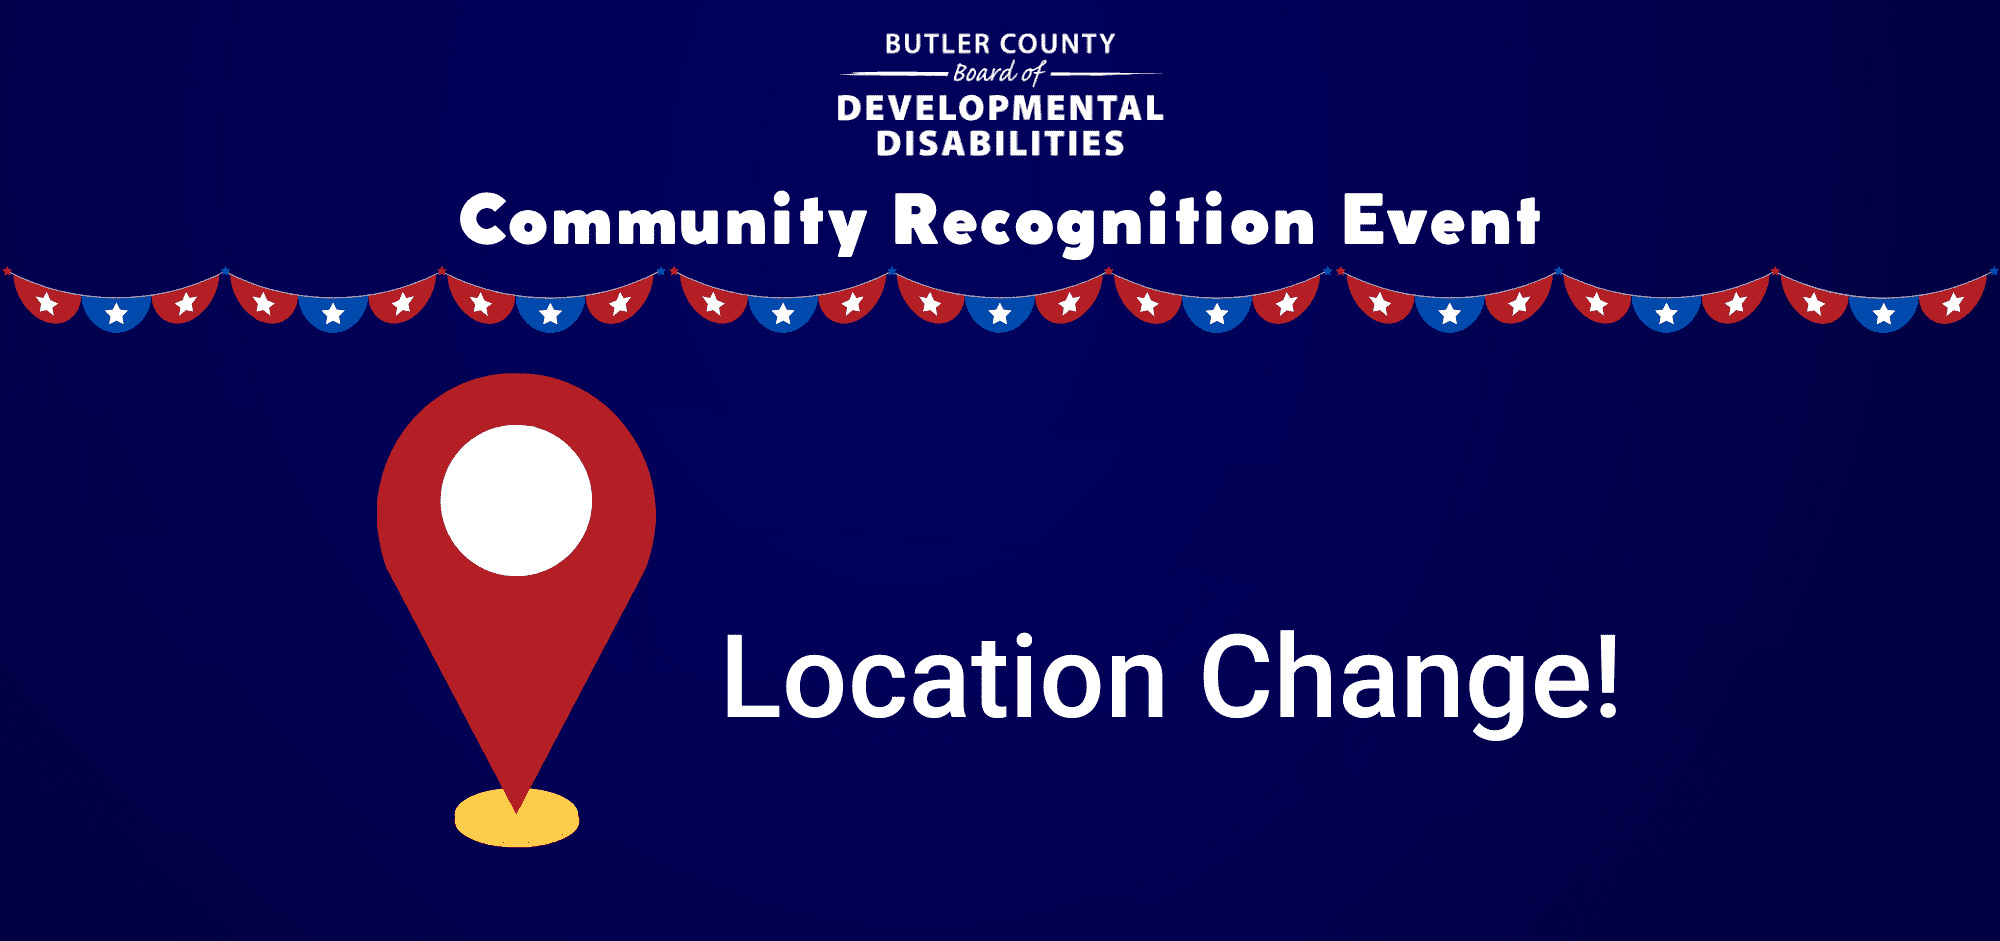 Patriotic, baseball-themed graphic reads: Community Recognition Event on Tuesday, June 14 at 6:00 p.m. at the Butler County Fairgrounds